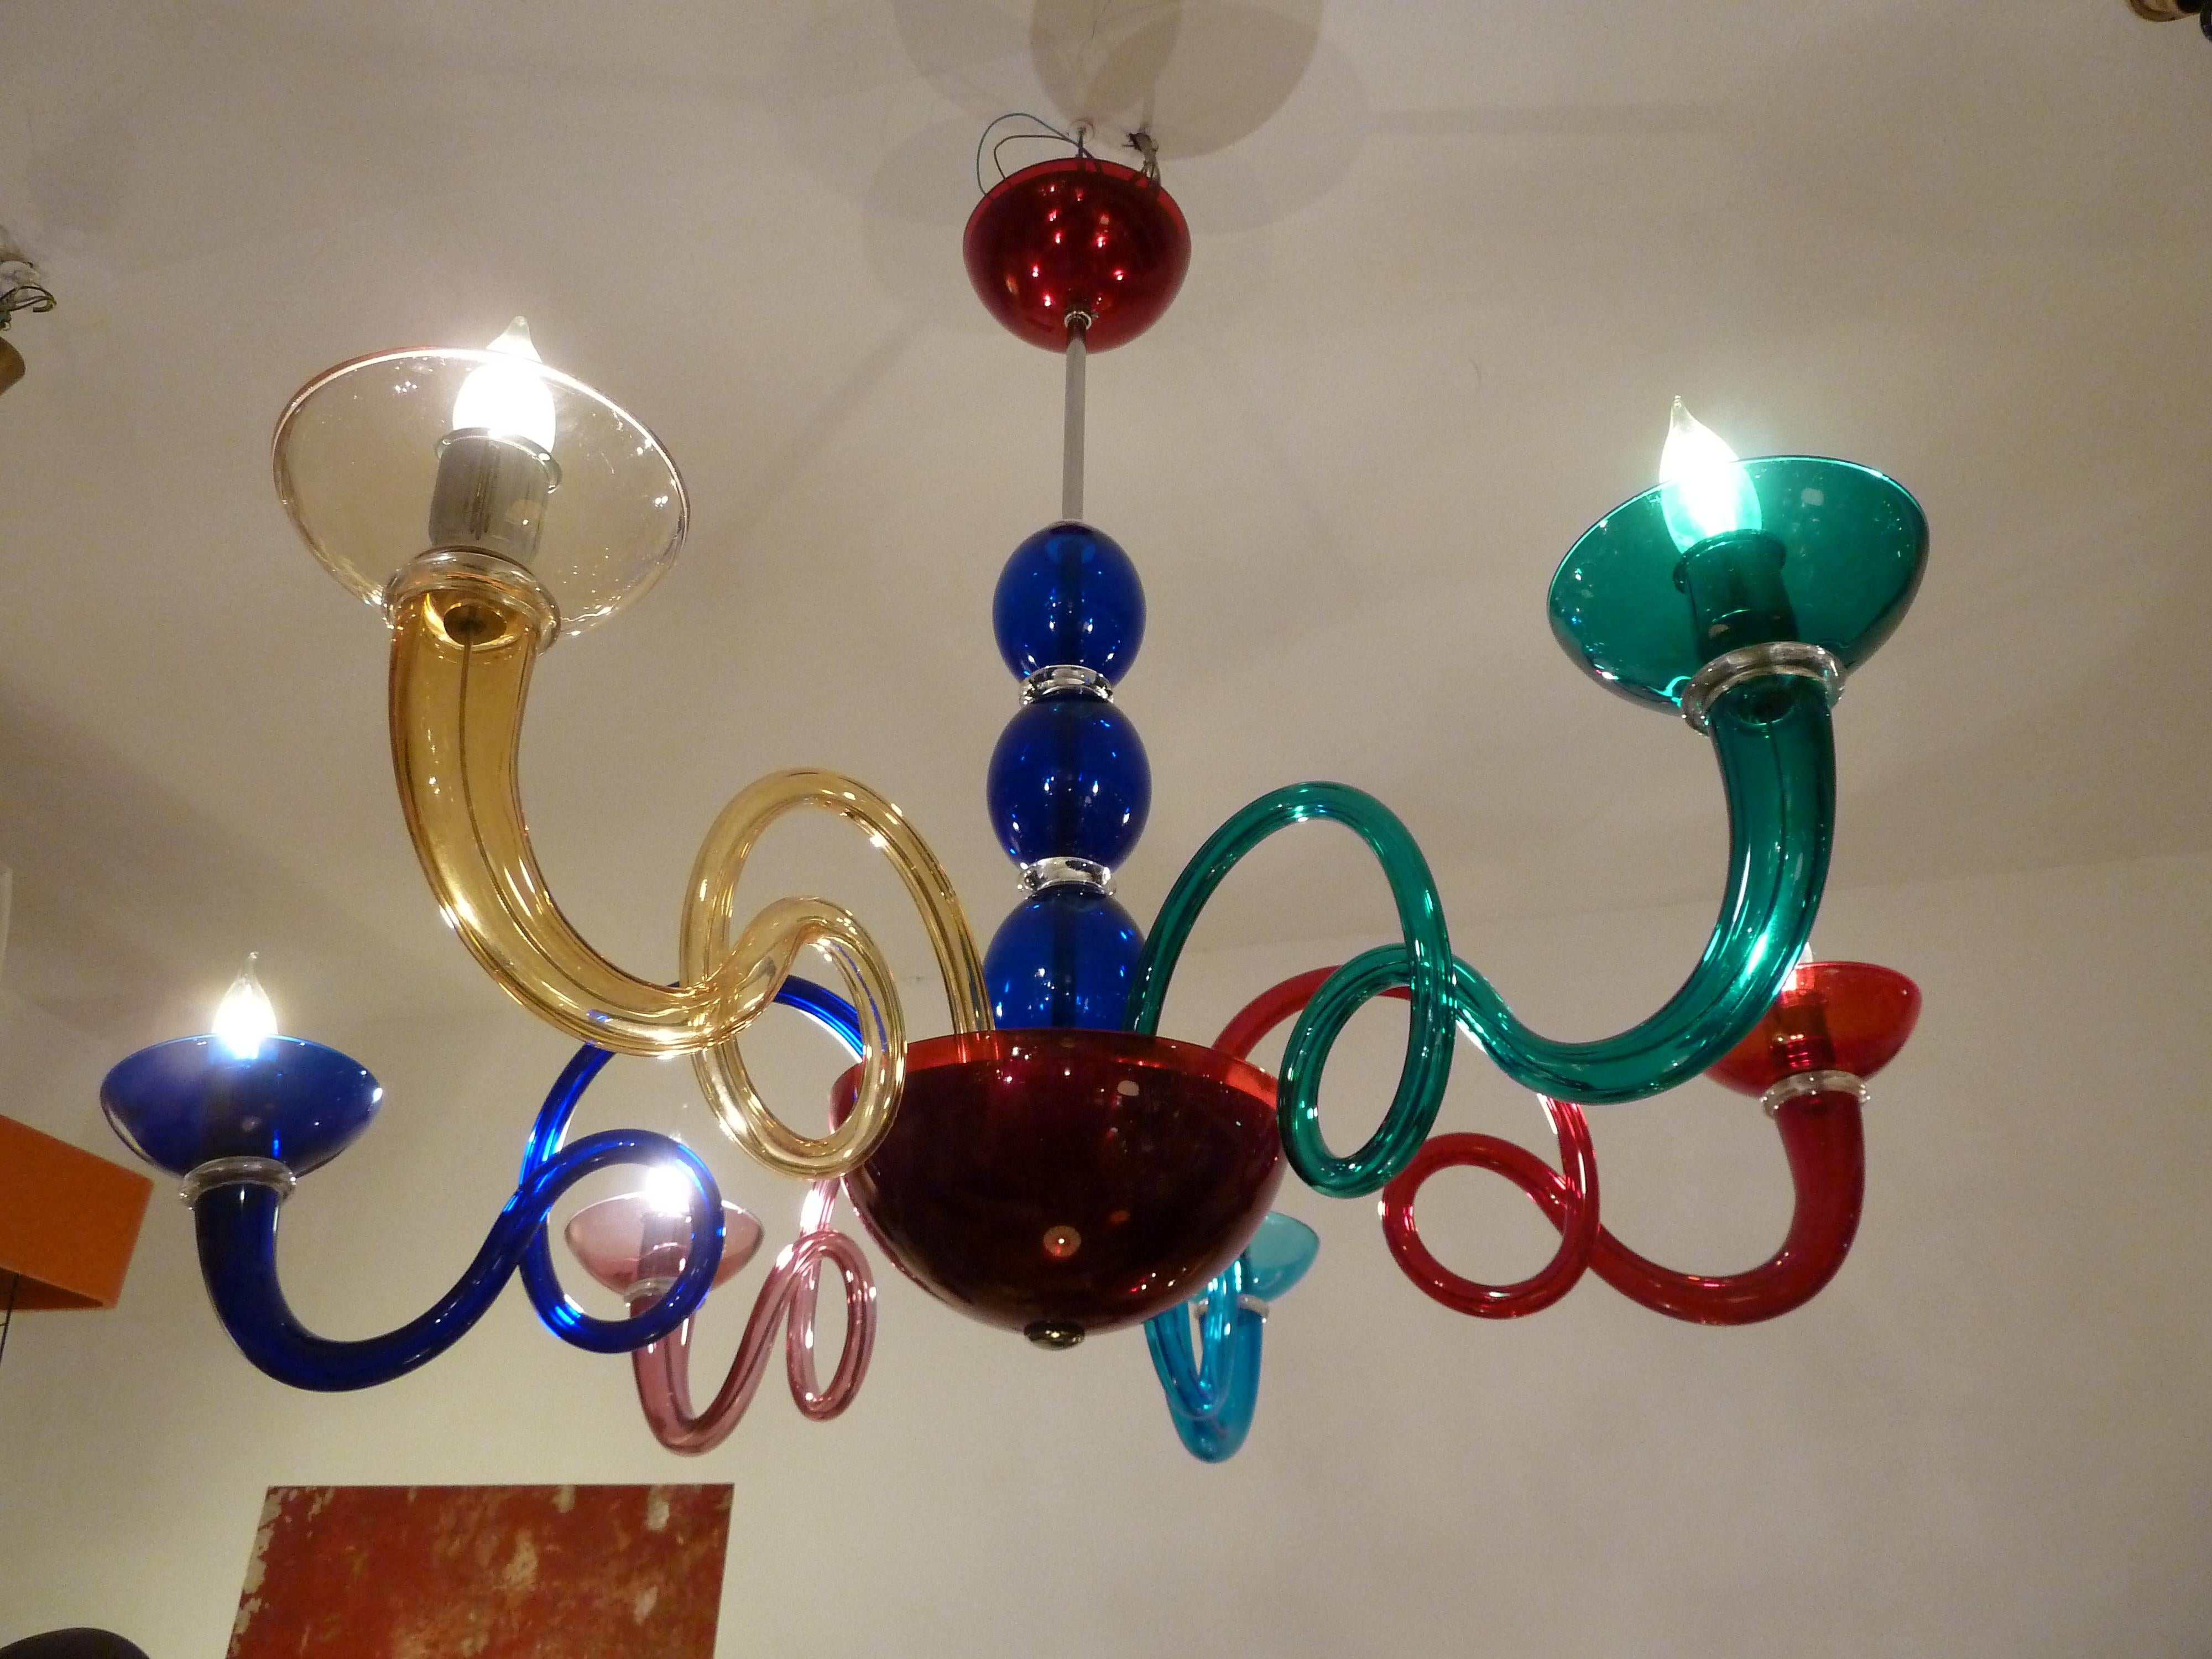 A rare and early colored-art-glass version of the Pantalica chandelier from Örni Halloween (the Alias of: Ernesto Gismondi)for Italian Company: VeArt, later sold to Artemide.
Elegant and Colorful this beautiful piece of Art is a redesign or a